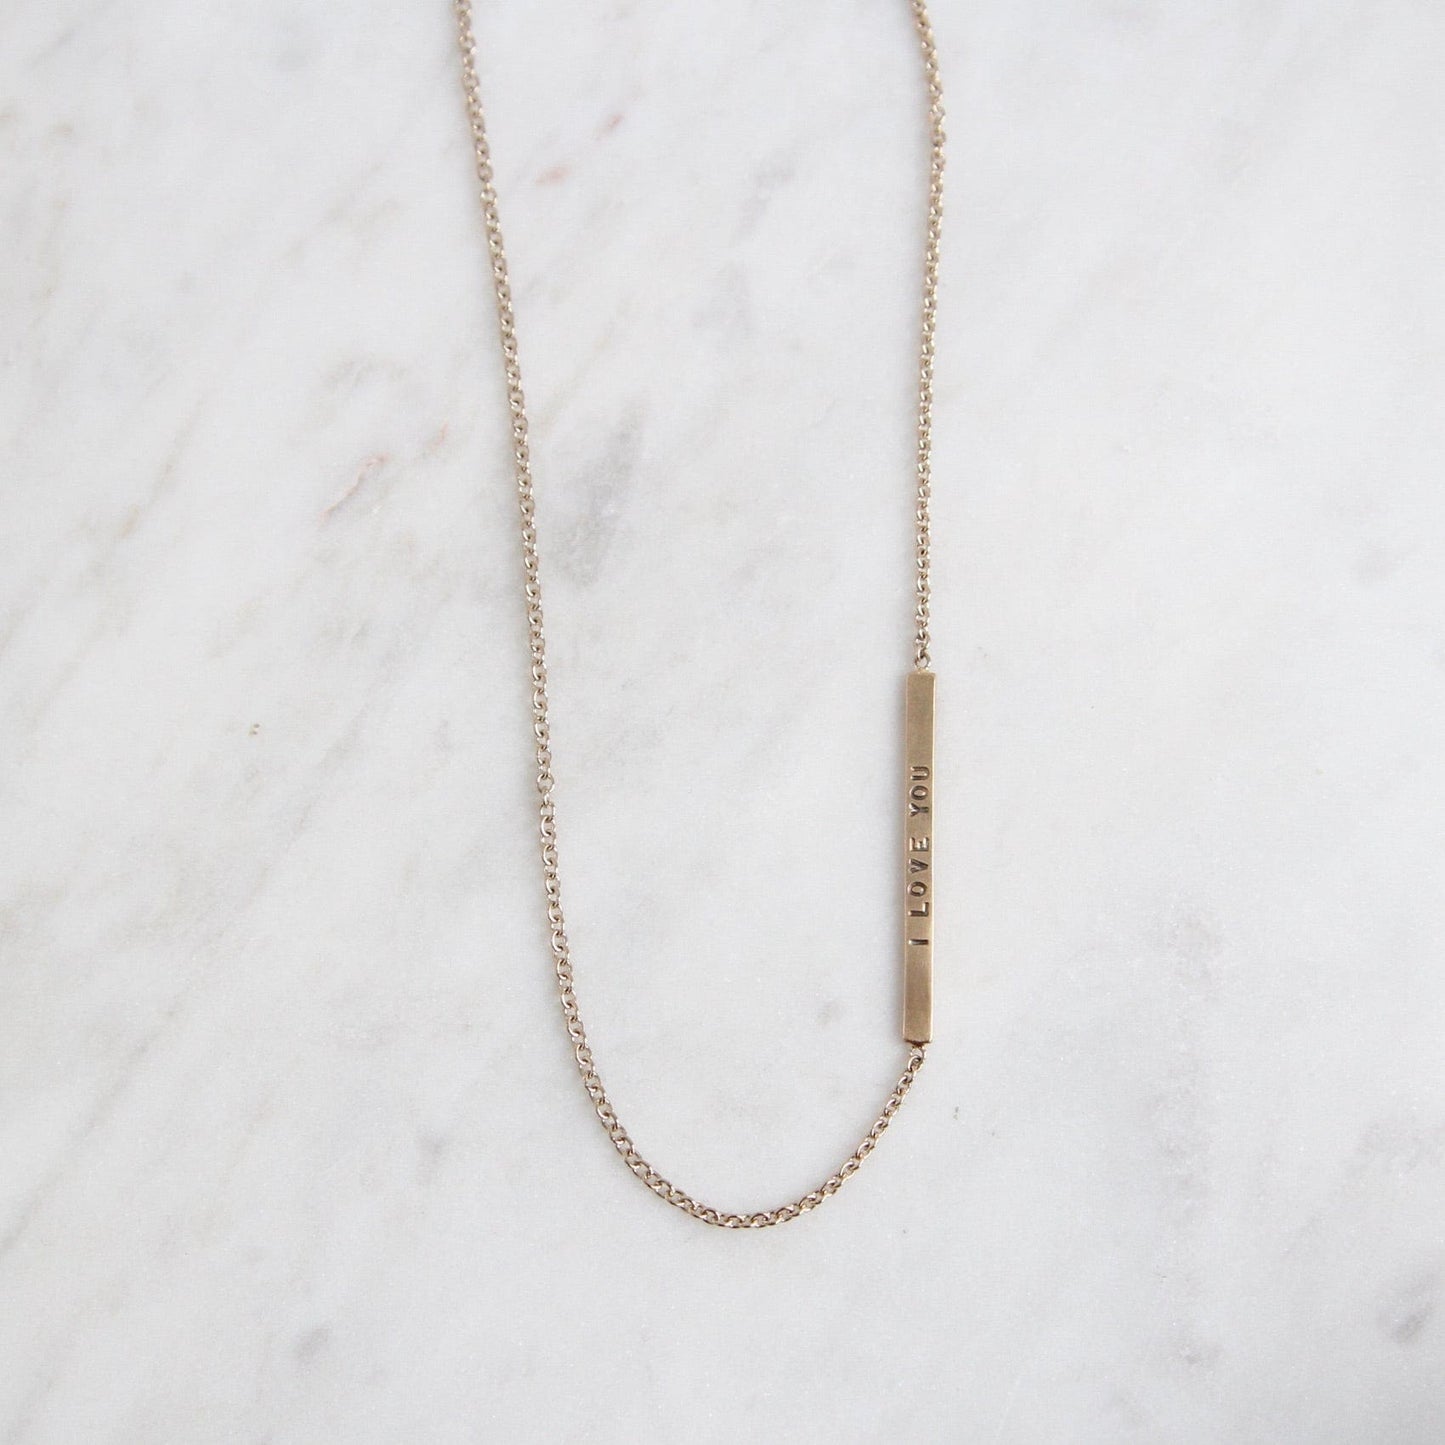 NKL-14K White Gold Chain with Yellow Gold 'I Love You' & 'XOXO' Bar